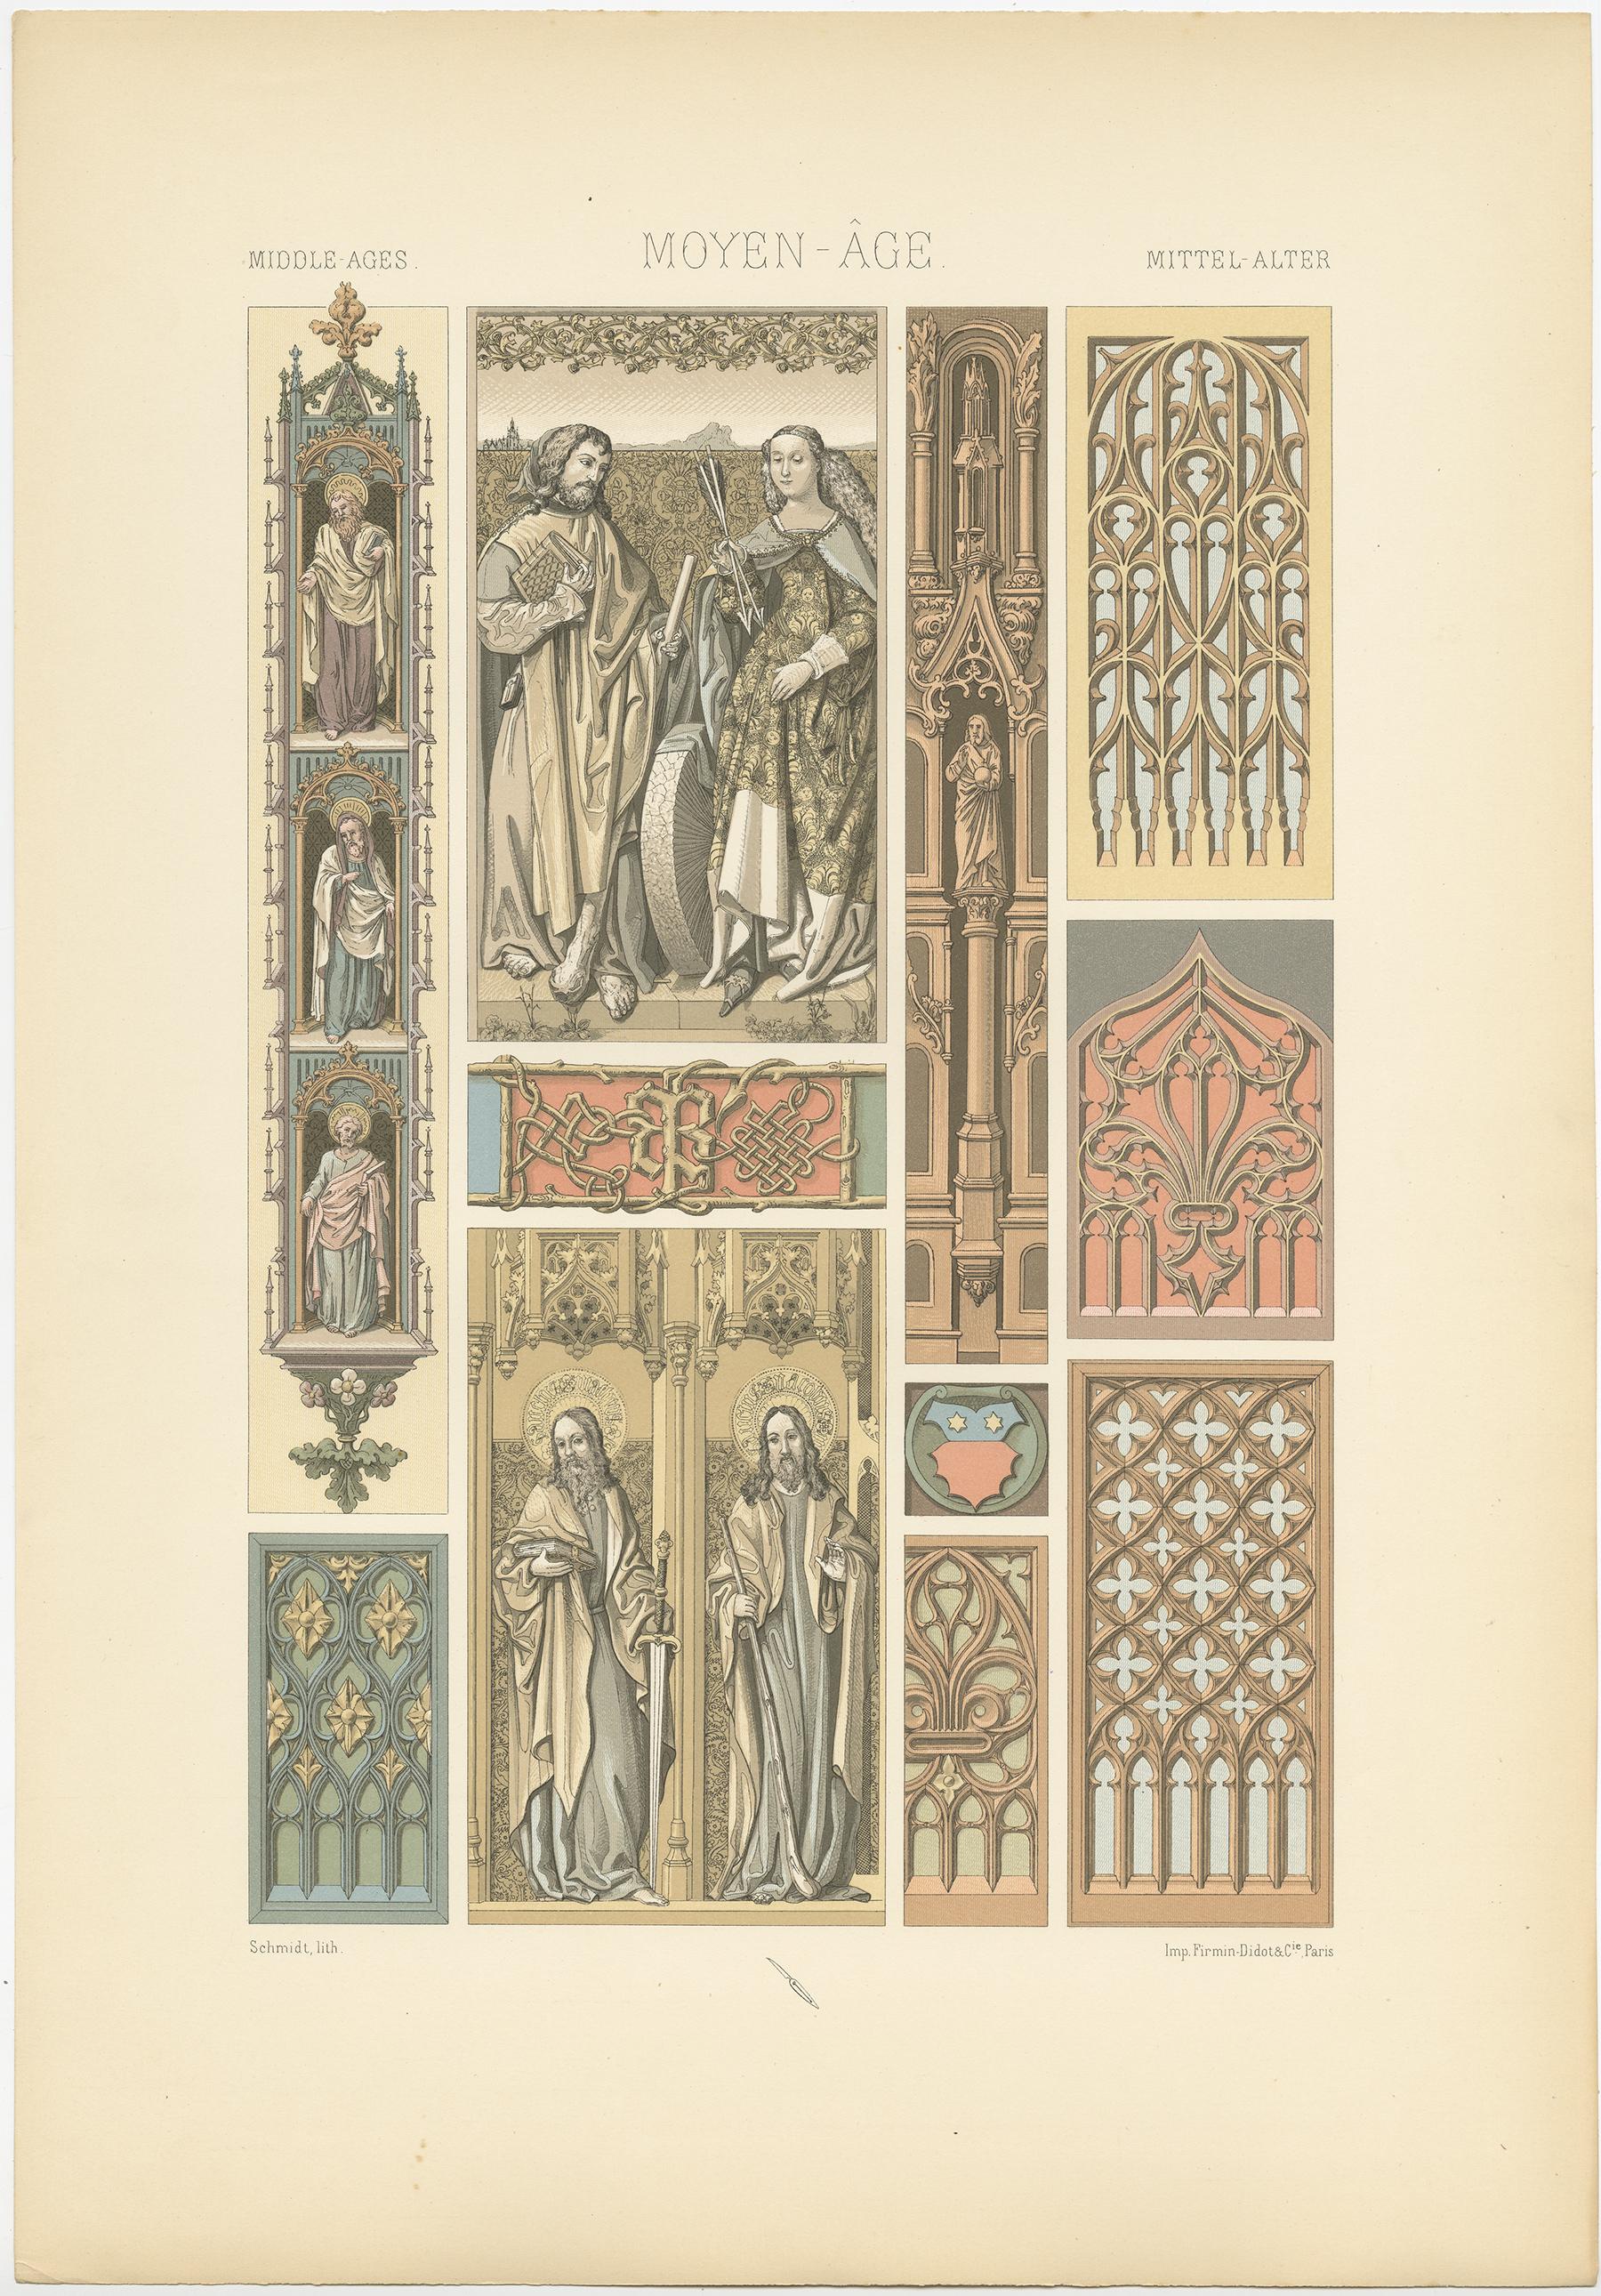 Antique print titled 'Middle Ages - Moyen Age - Mittel Alter'. Chromolithograph of motifs from woodwork, manuscripts and votive paintings ornaments.
This print originates from 'l'Ornement Polychrome' by Auguste Racinet. Published circa 1890.